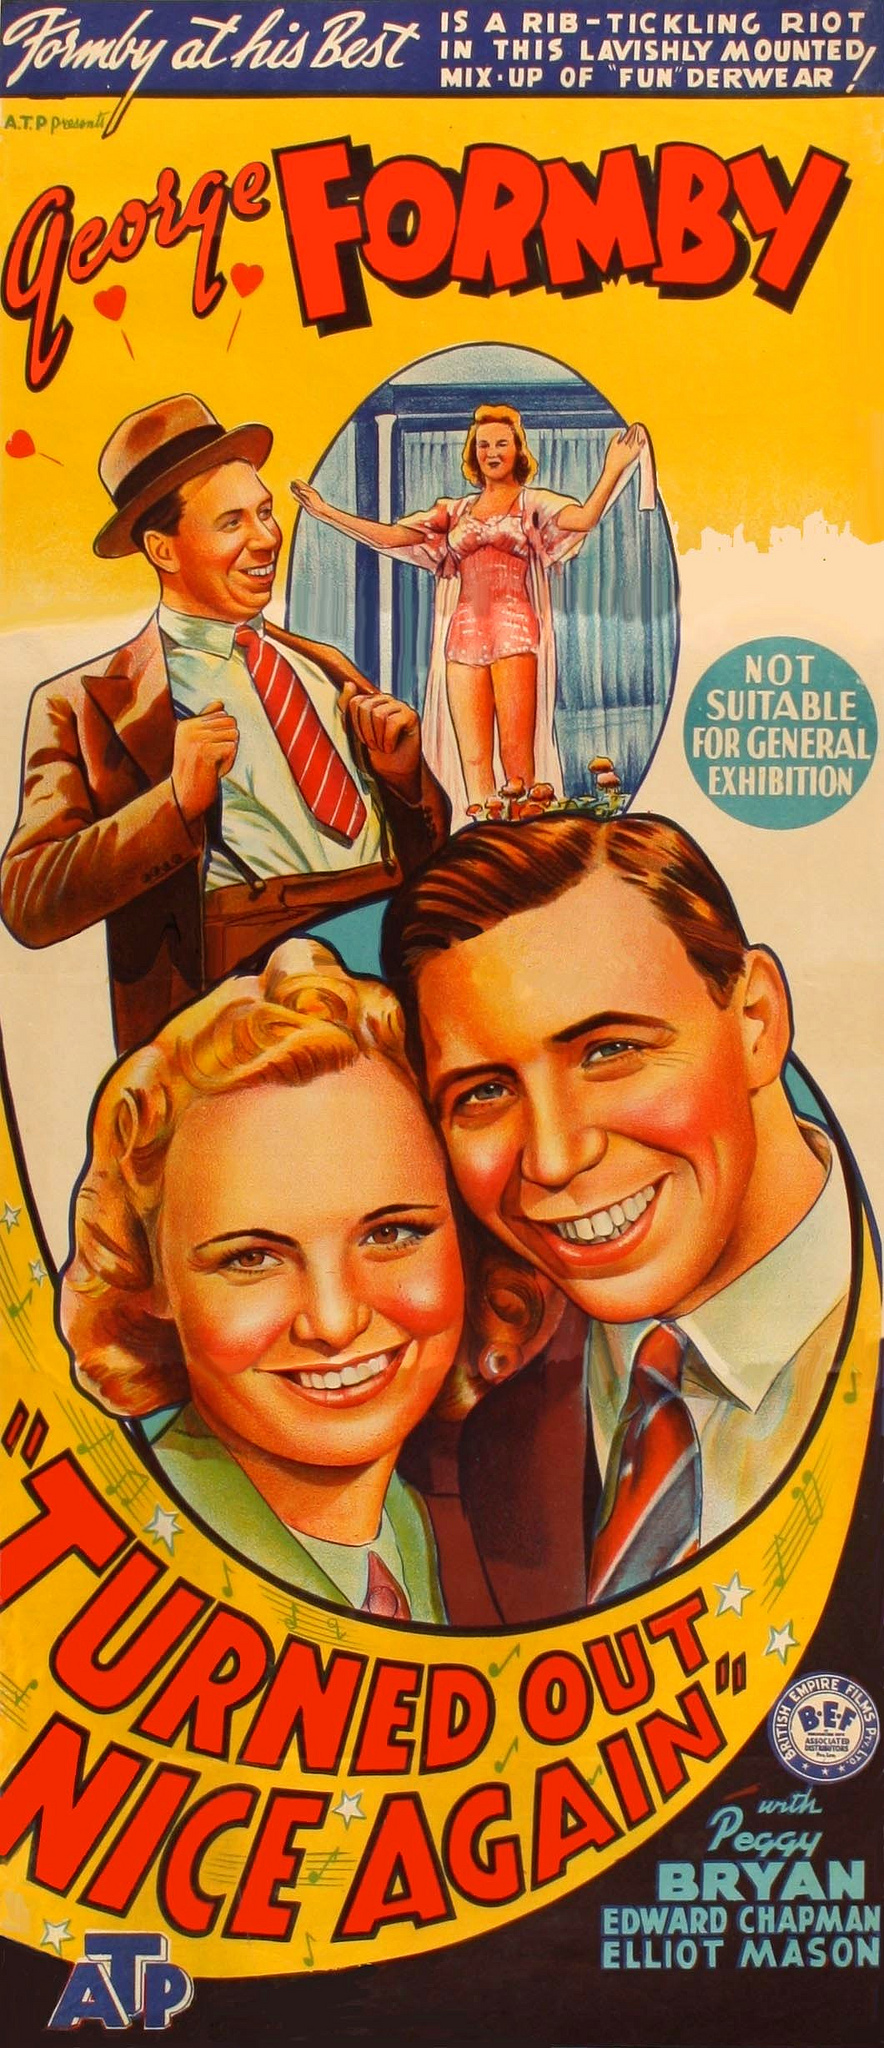 Turned Out Nice Again (1941)